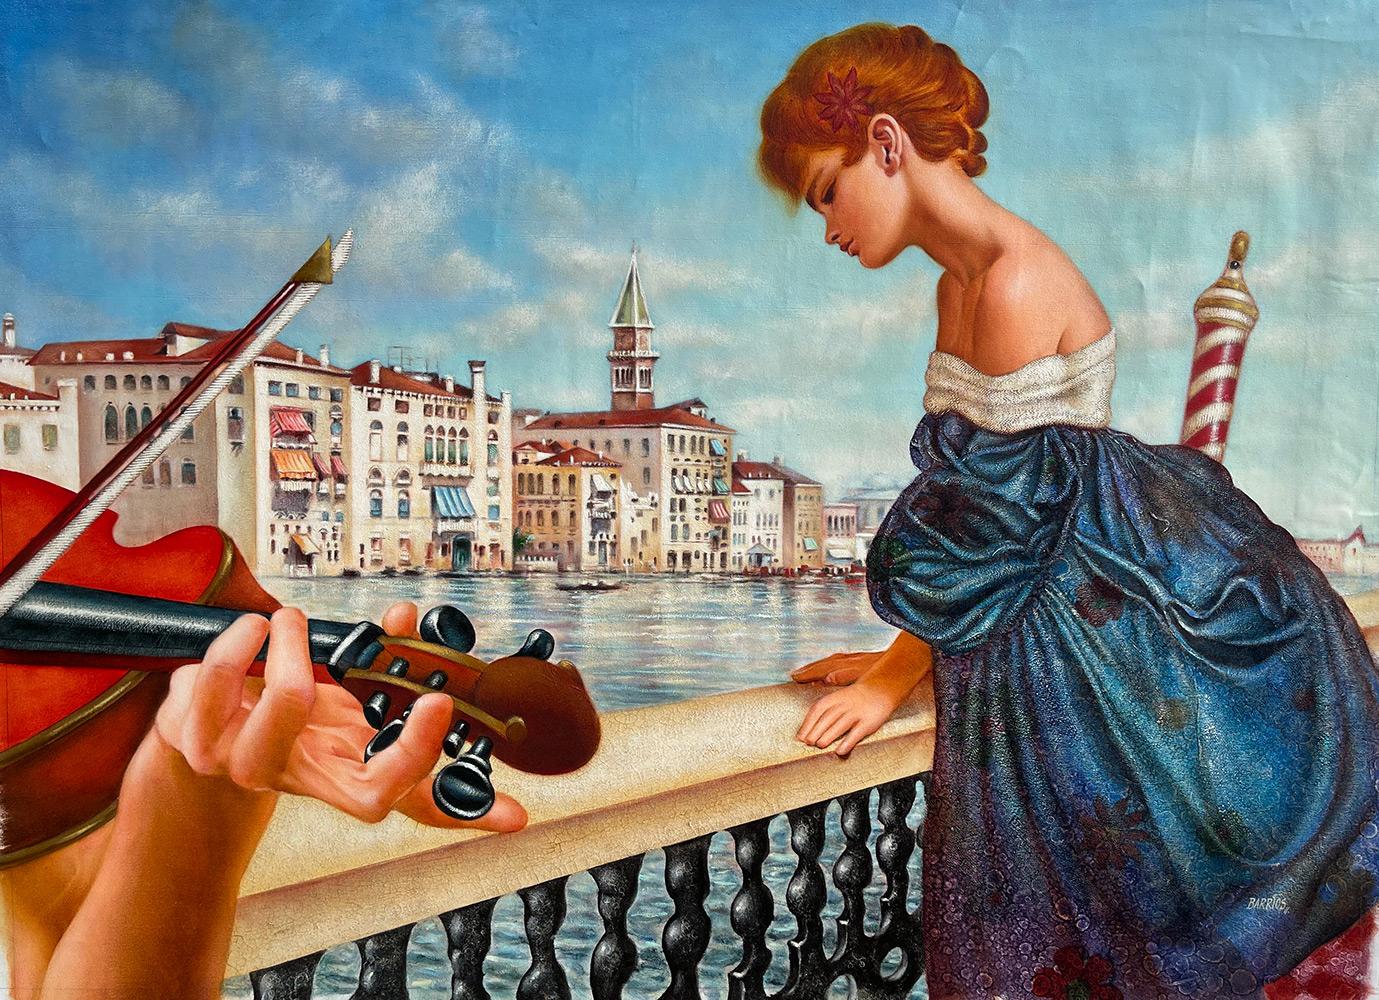 Artist: Edgar Barrios
Title: Bohemian Venice II
Medium: Original Oil on Canvas
Signature: Hand-signed by the Artist
Size: Approximately 48x33 inches
Framed: This artwork comes un-framed and un-stretched. This item will come rolled. 
Biography: Edgar